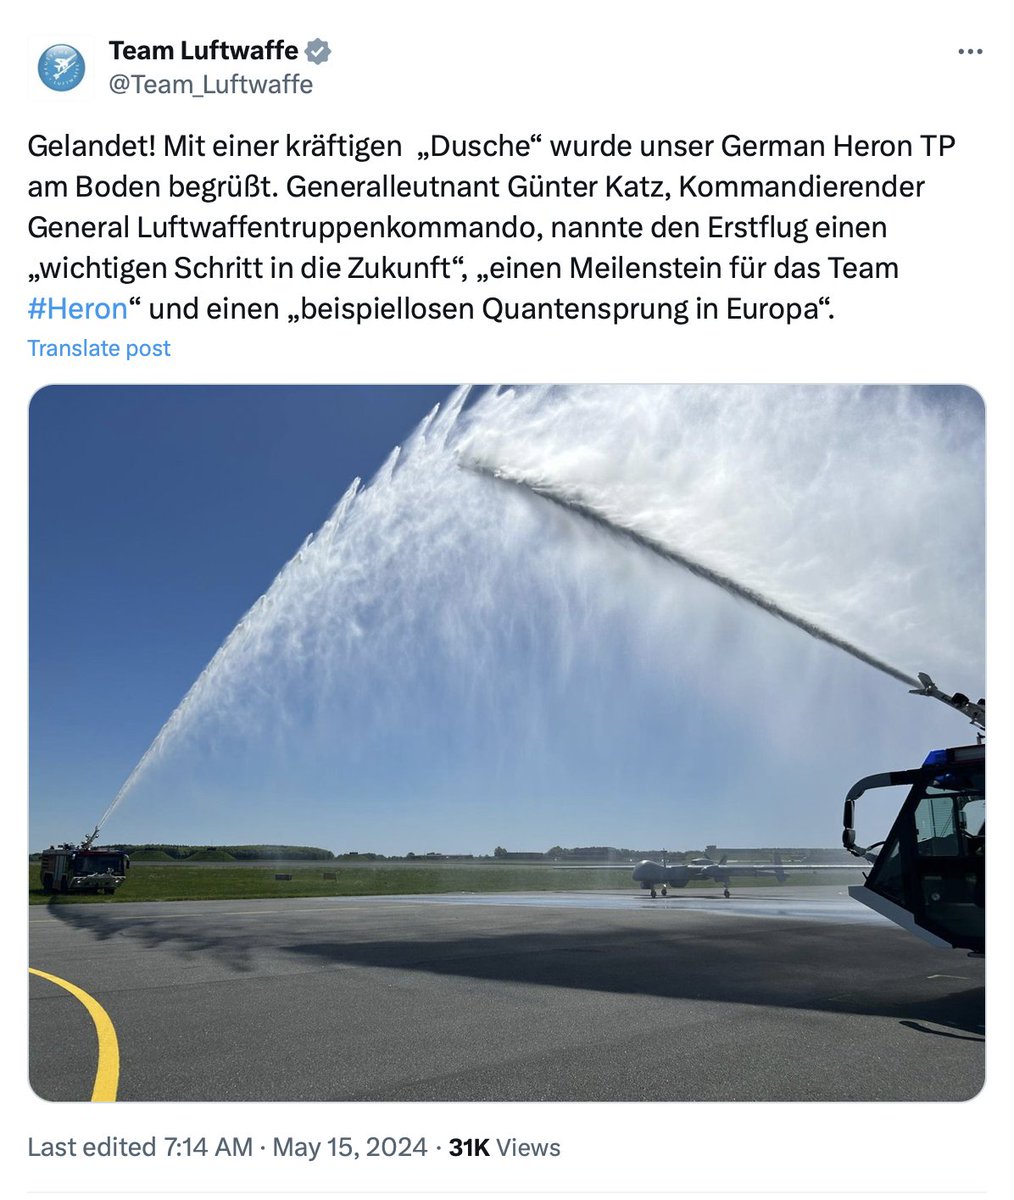 On May 15, Nakba Day, the Berlin regime's air force @Team_Luftwaffe, which was founded by veterans of the Hitler administration, performed a ceremonial salute for an Israeli 'Heron' killer drone. These German monsters celebrated the machinery of systematic child-murder